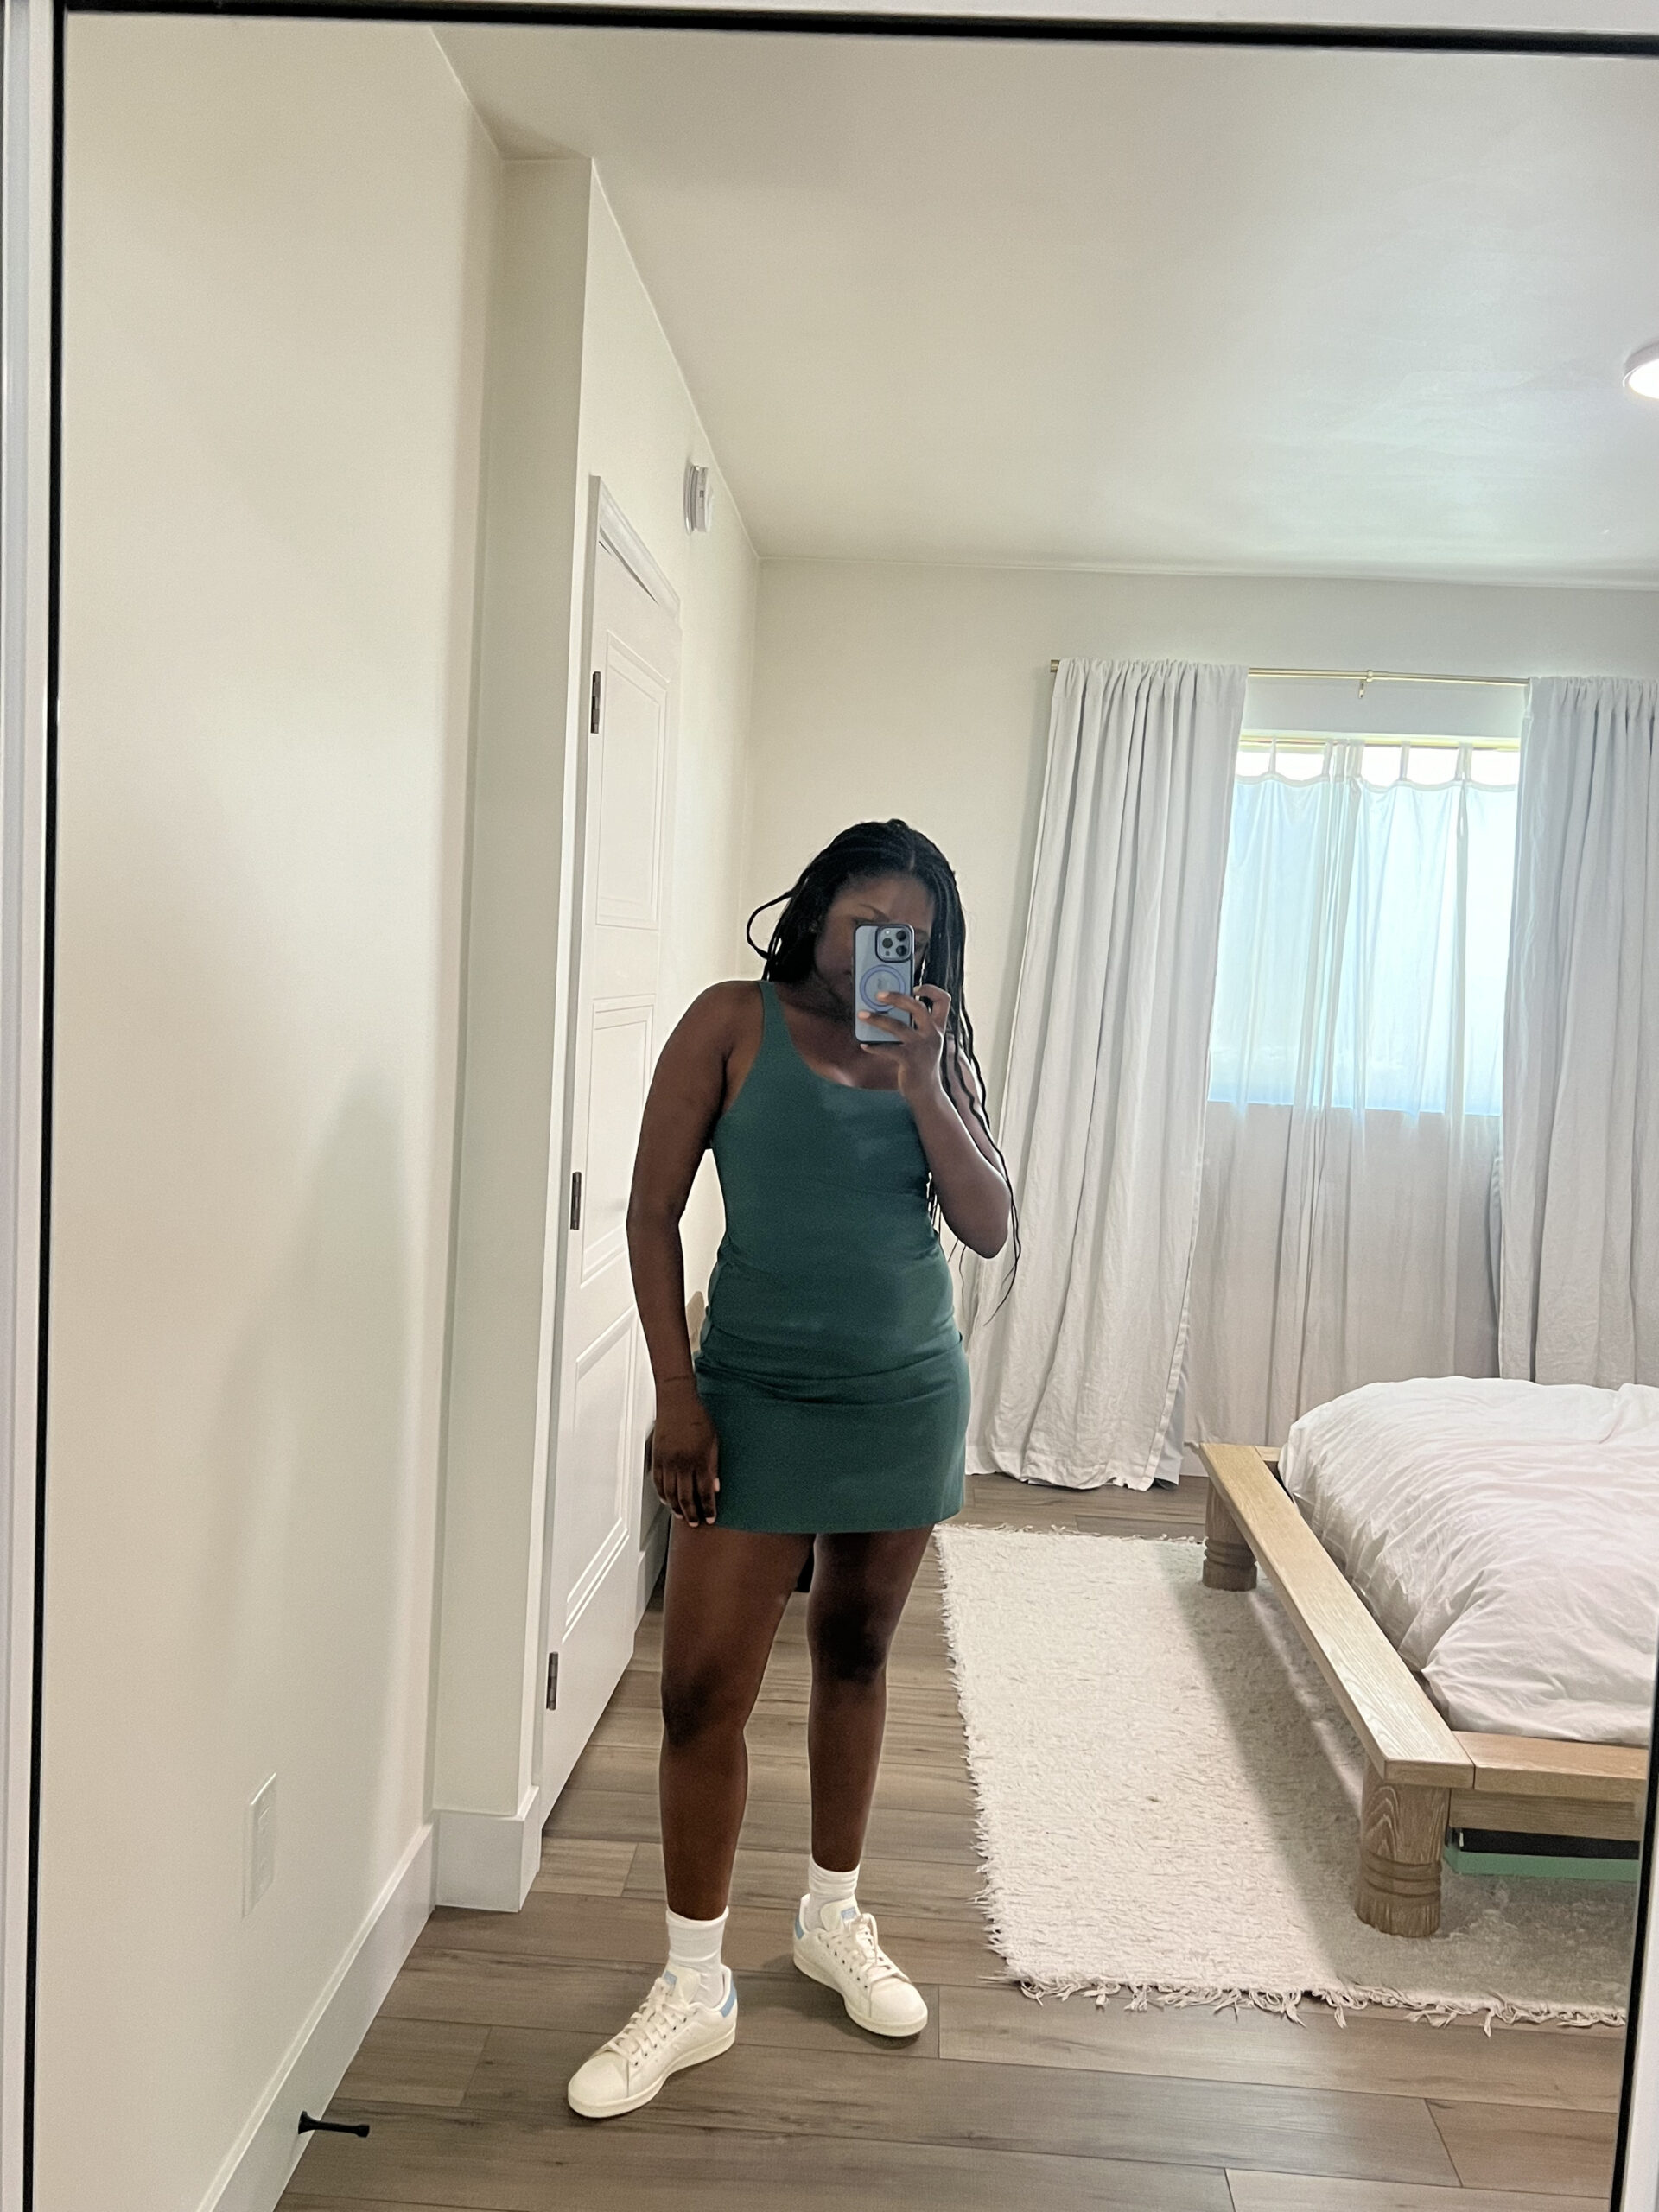 A person in a green dress takes a mirror selfie in a minimalist bedroom. The person is wearing white sneakers. The room has a wooden bed, white curtains, and a white rug.